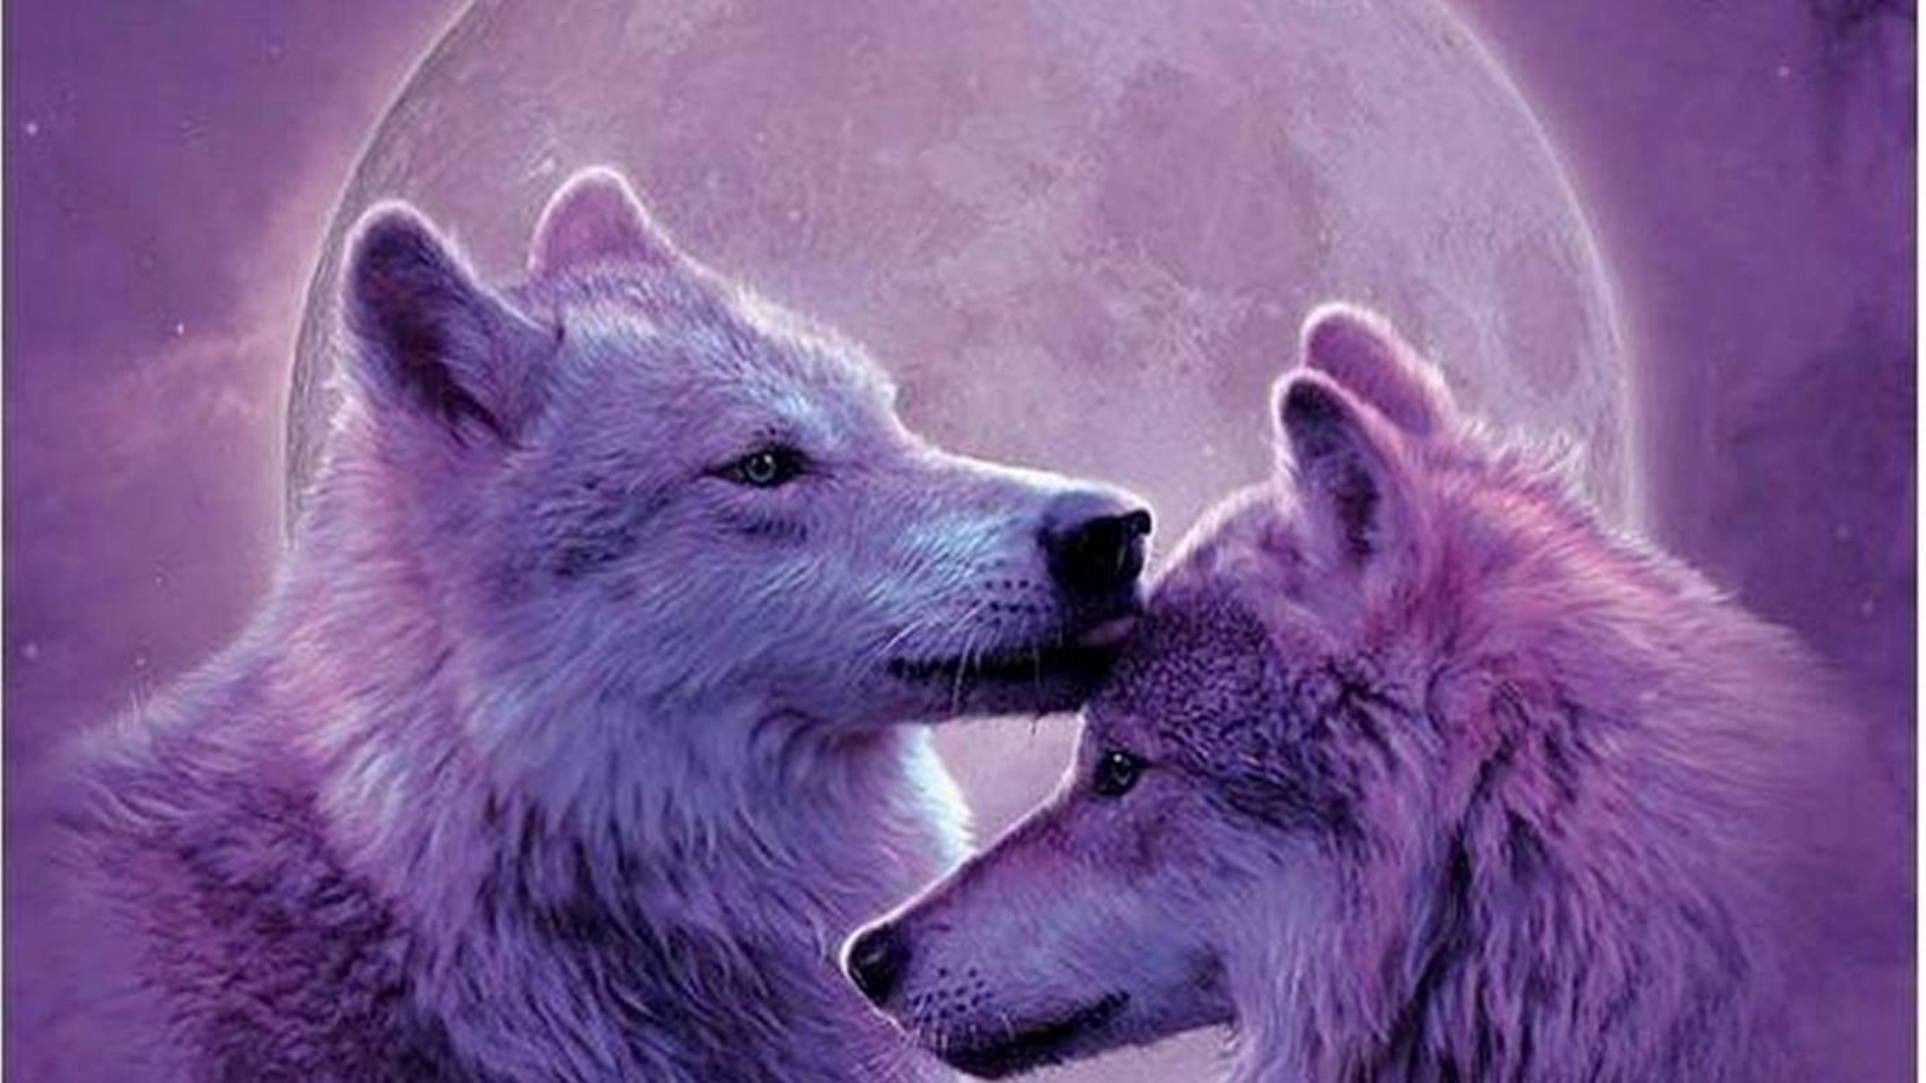 other moonwolves wolves animals painting moon nature wolf 53 picture